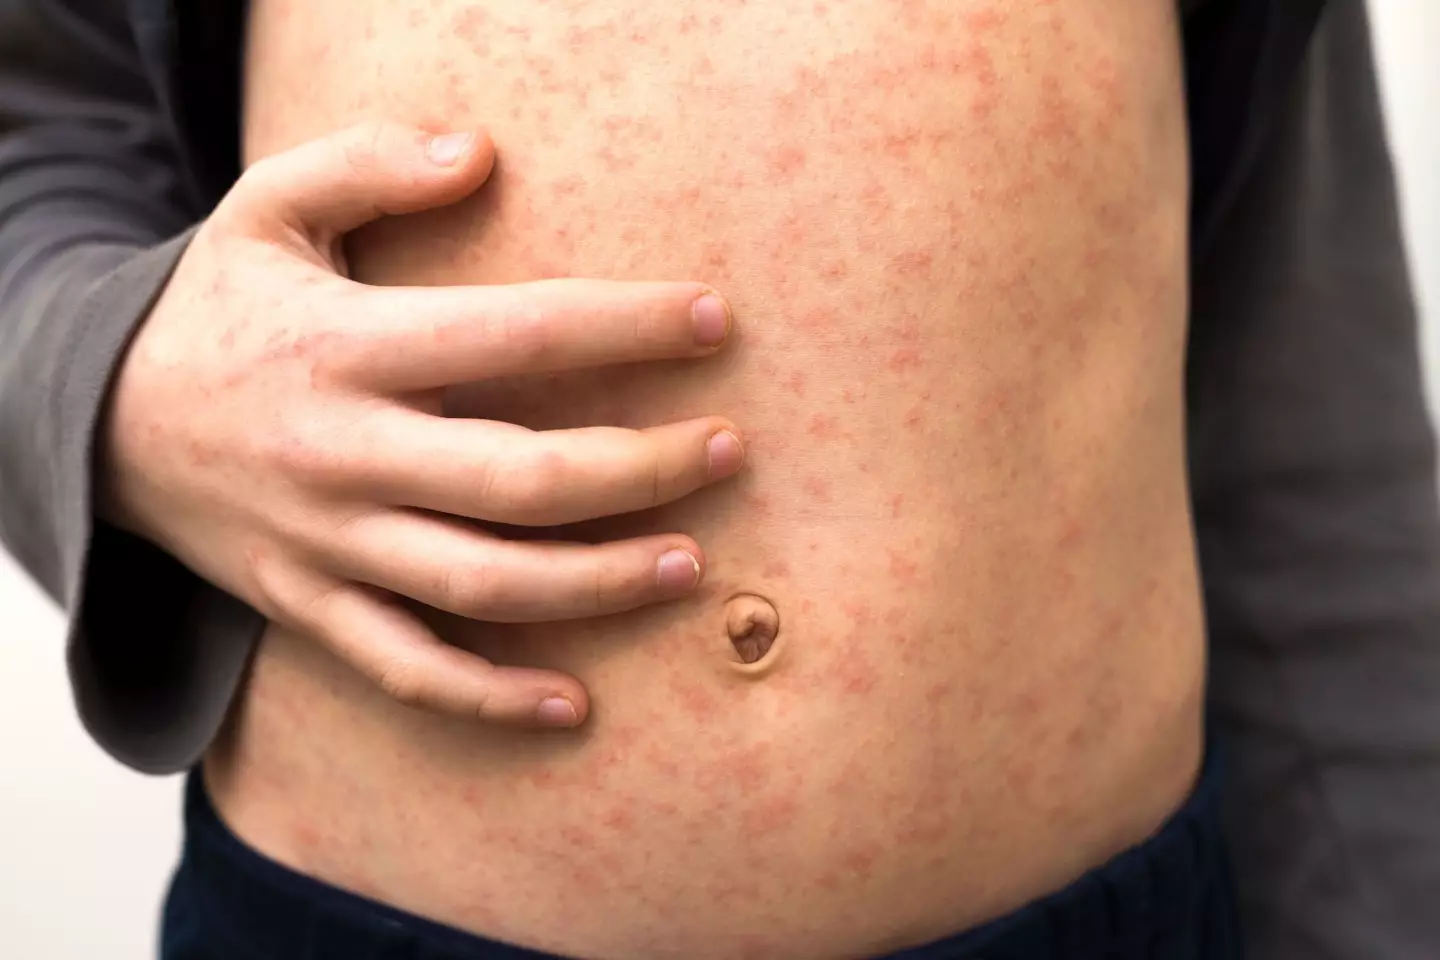 Little Margot had 'awful' symptoms as the rash spread across her body (iStock / Getty Images Plus)